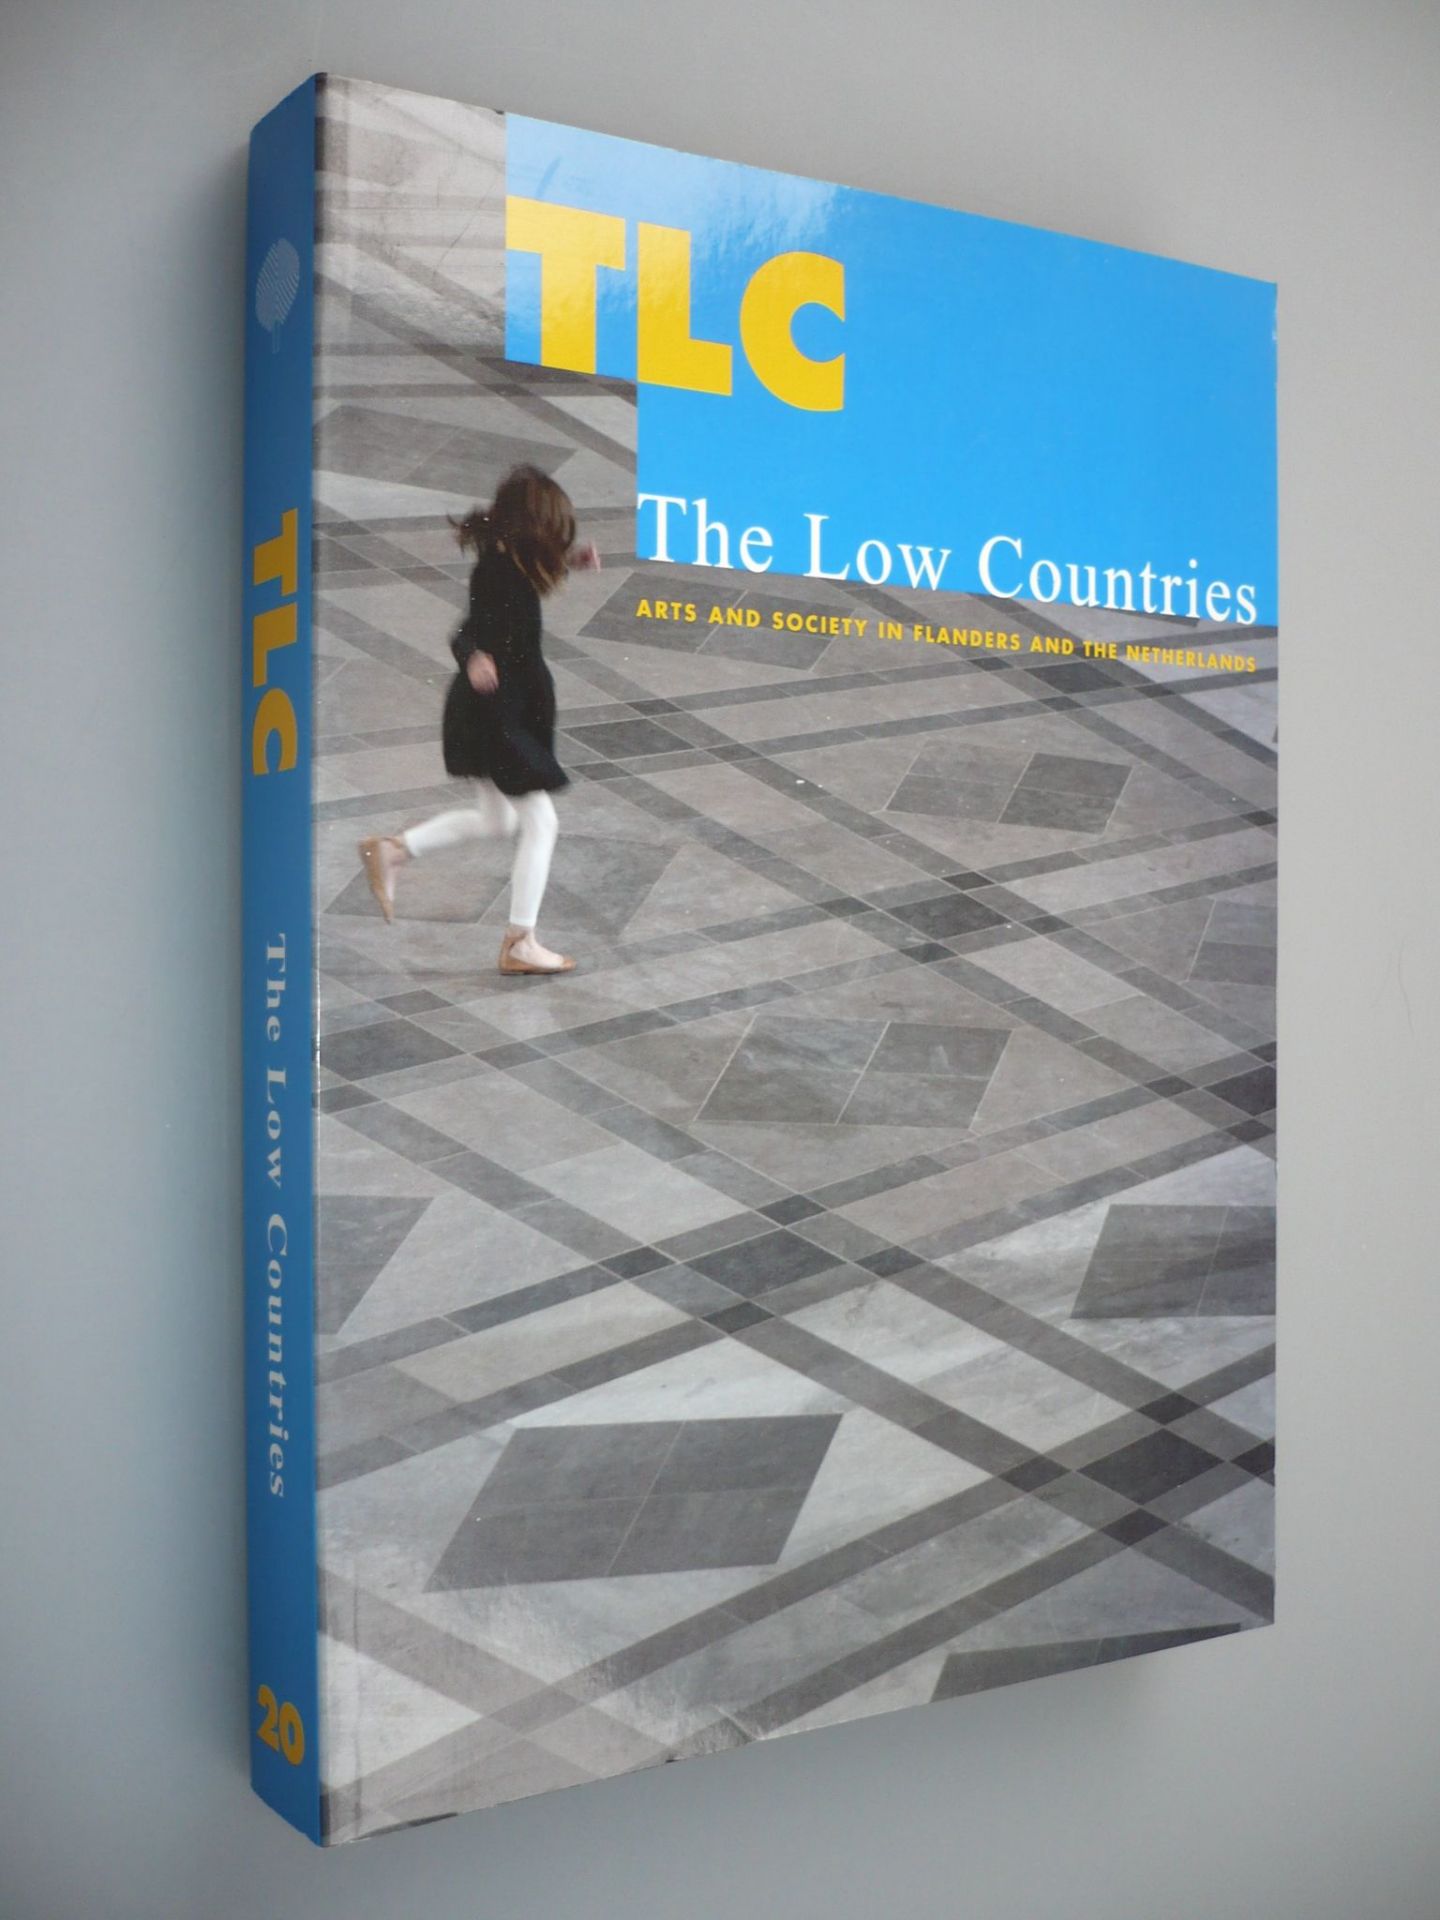 The Low Countries: Arts and Society in Flanders and the Netherlands; Volume 20 - Devoldere, Luc (ed.)